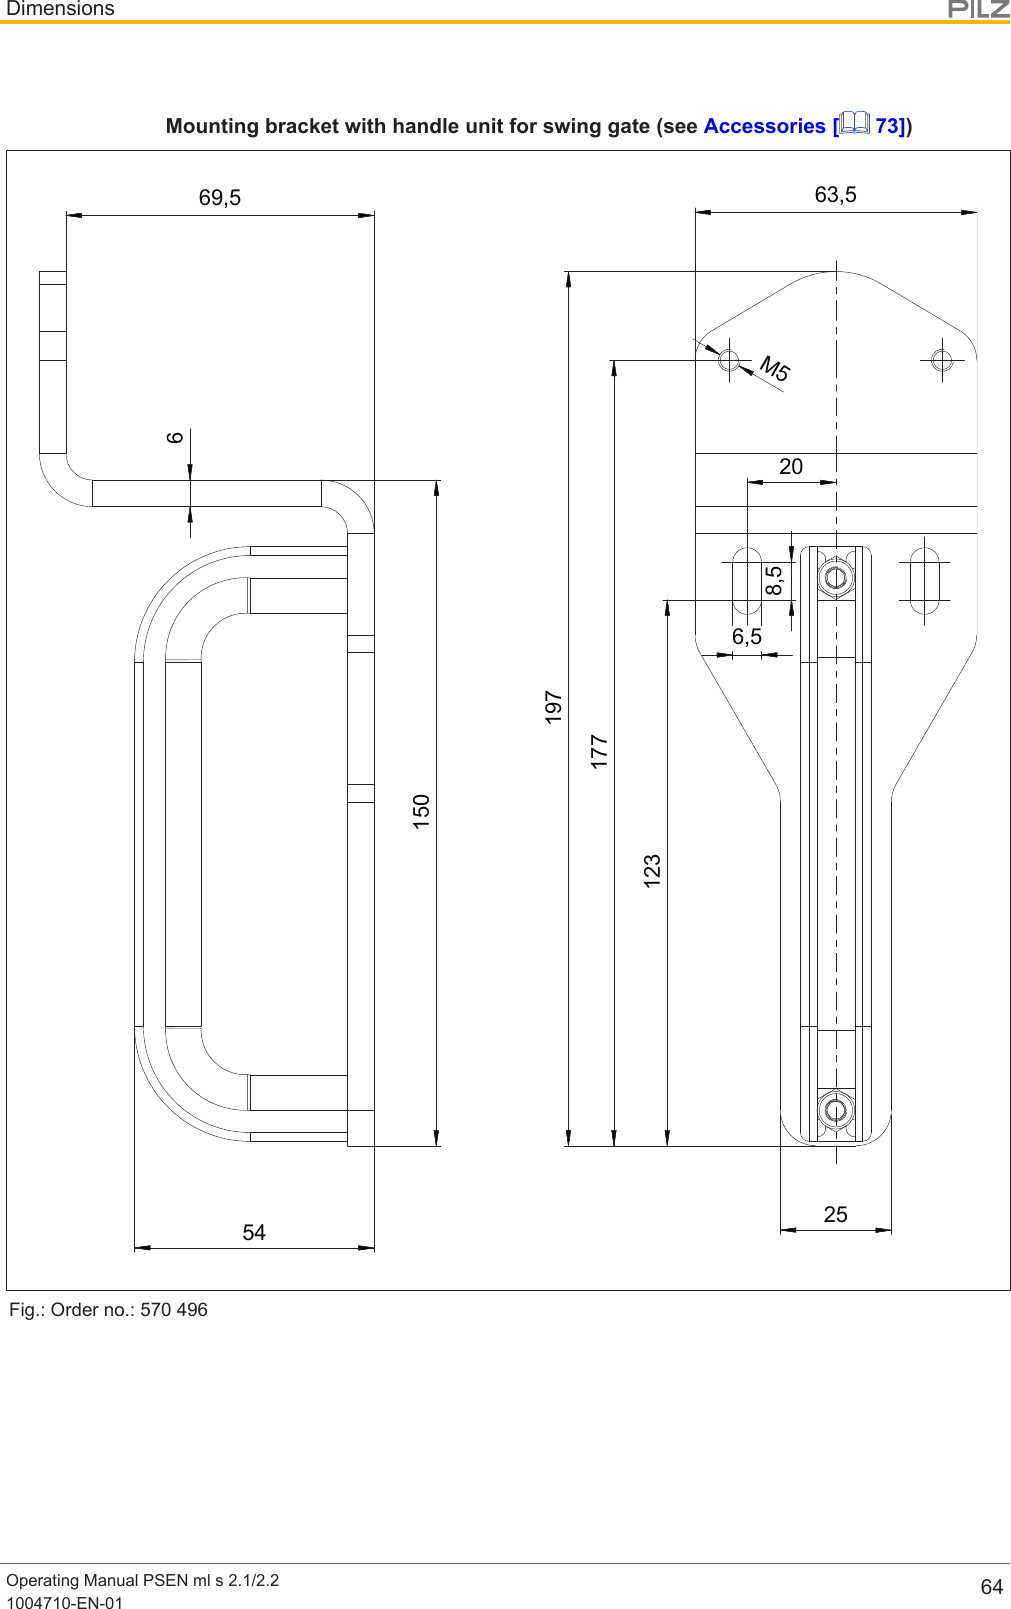 DimensionsOperating Manual PSEN ml s 2.1/2.21004710-EN-01 64Mounting bracket with handle unit for swing gate (see Accessories [  73])19769,517768,56,5123150M5205463,525Fig.: Order no.: 570496